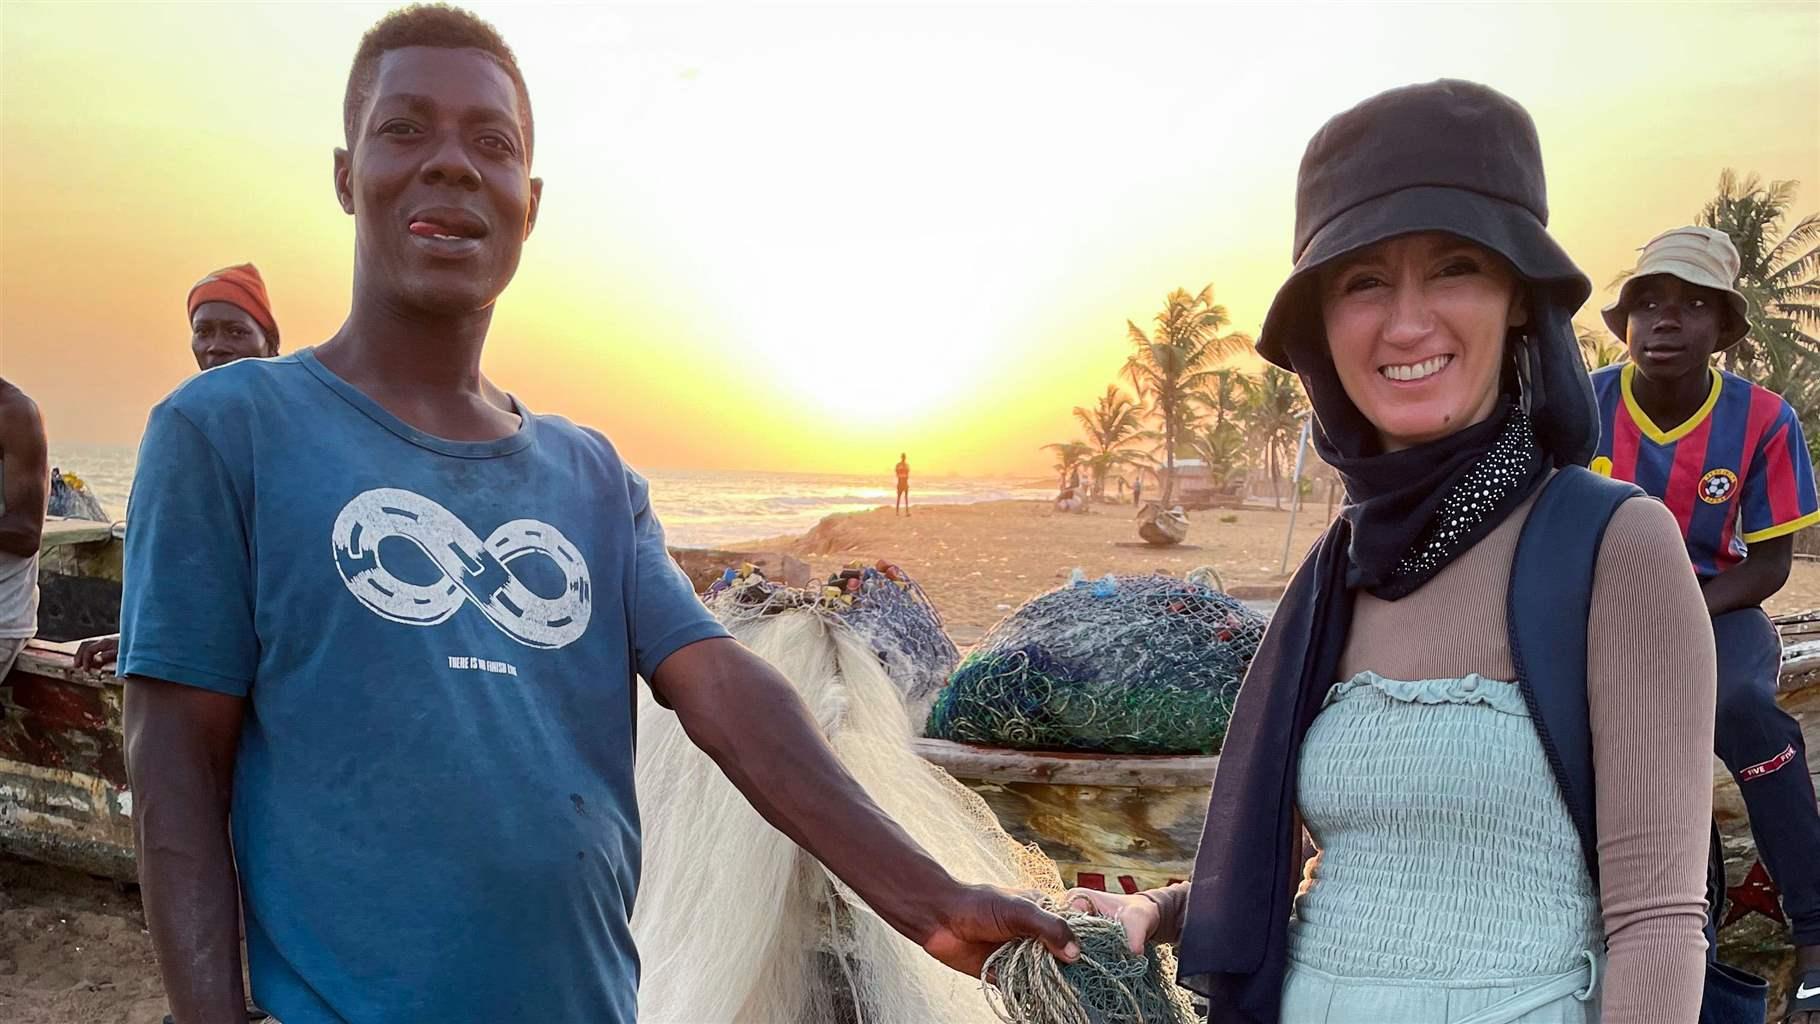 A man and a woman hold a white-and-blue fishing net while standing on a sandy beach as the sun sets behind them. Other individuals stand behind them next to another pile of fishing nets.